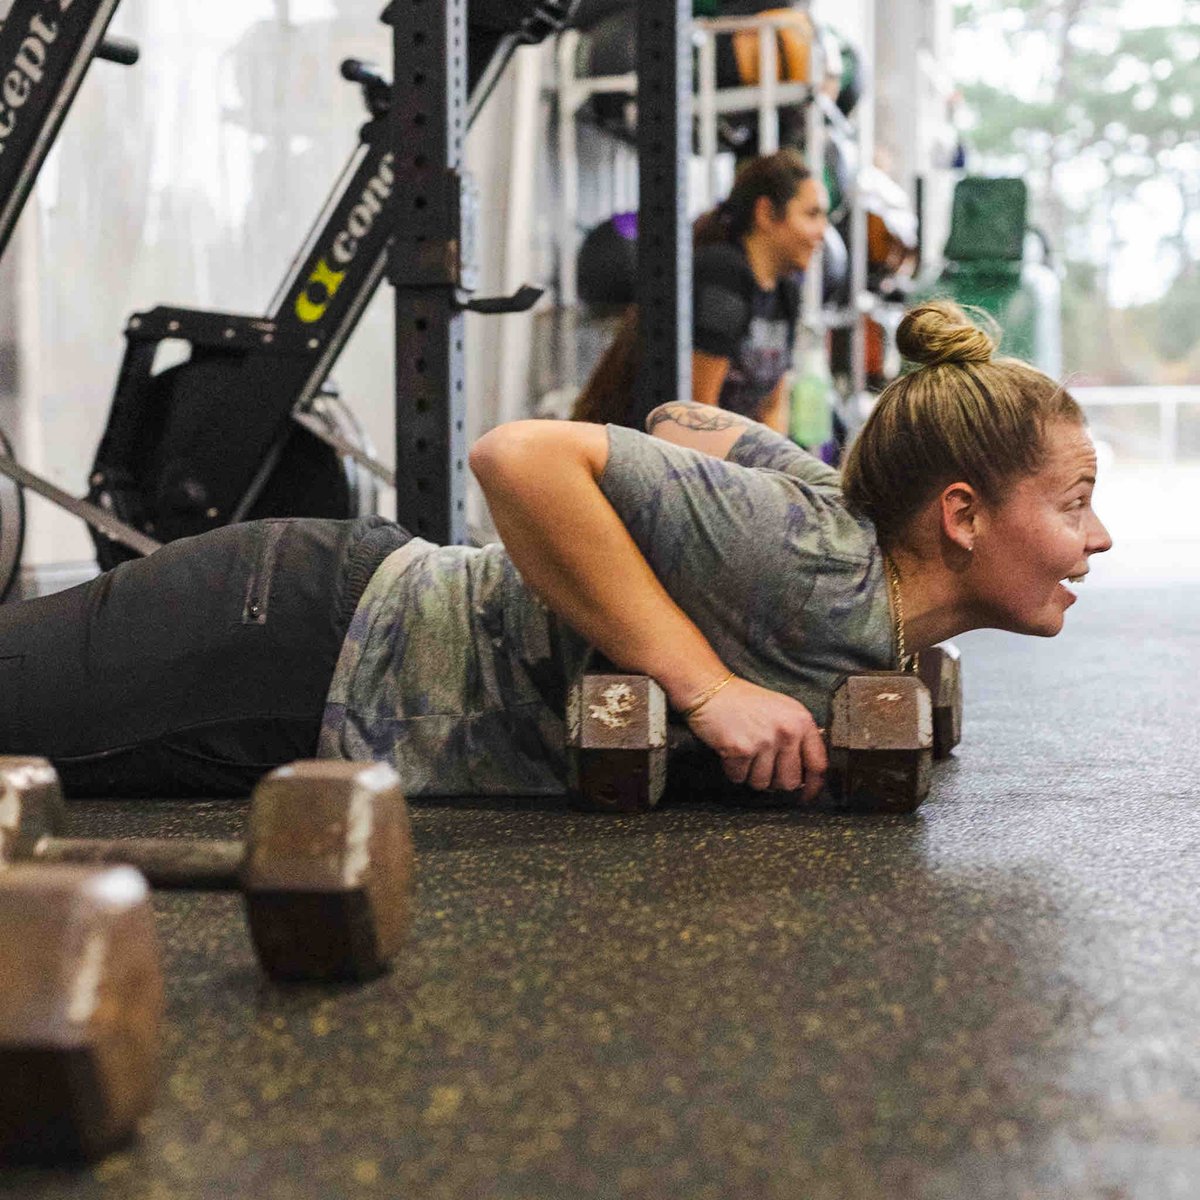 Recovery is just as important as lifting. Embrace the pause, let those muscles quickly recharge!

#RecoveryIsKey #ListenToYourBody #CrossFitDeLand #BuildingAthletes #Exercise #WestVolusiaWellness #DeLand #Fitness #Gym